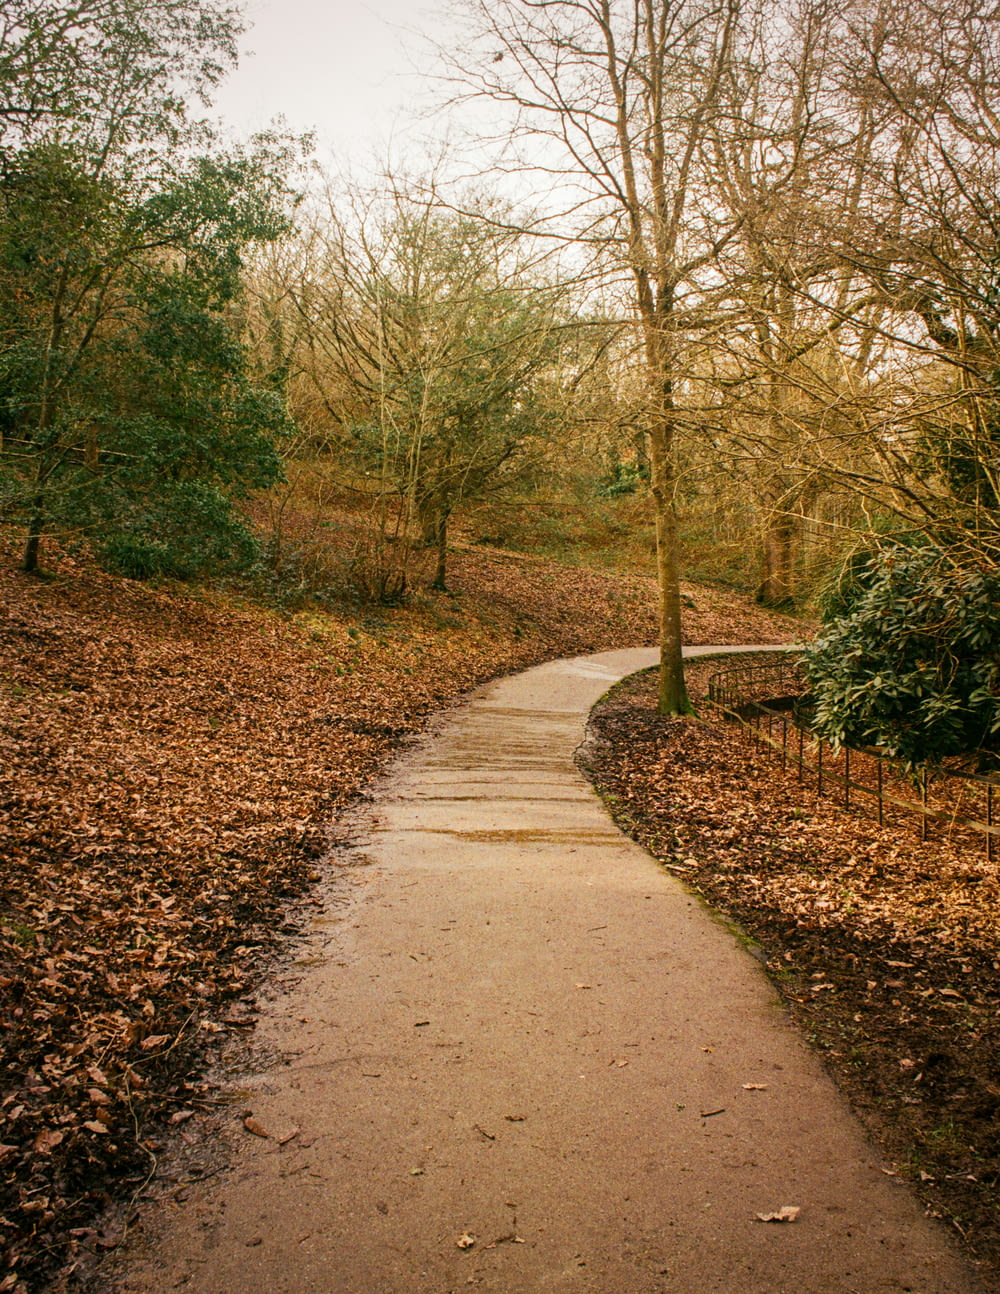 a path in a wooded area surrounded by trees